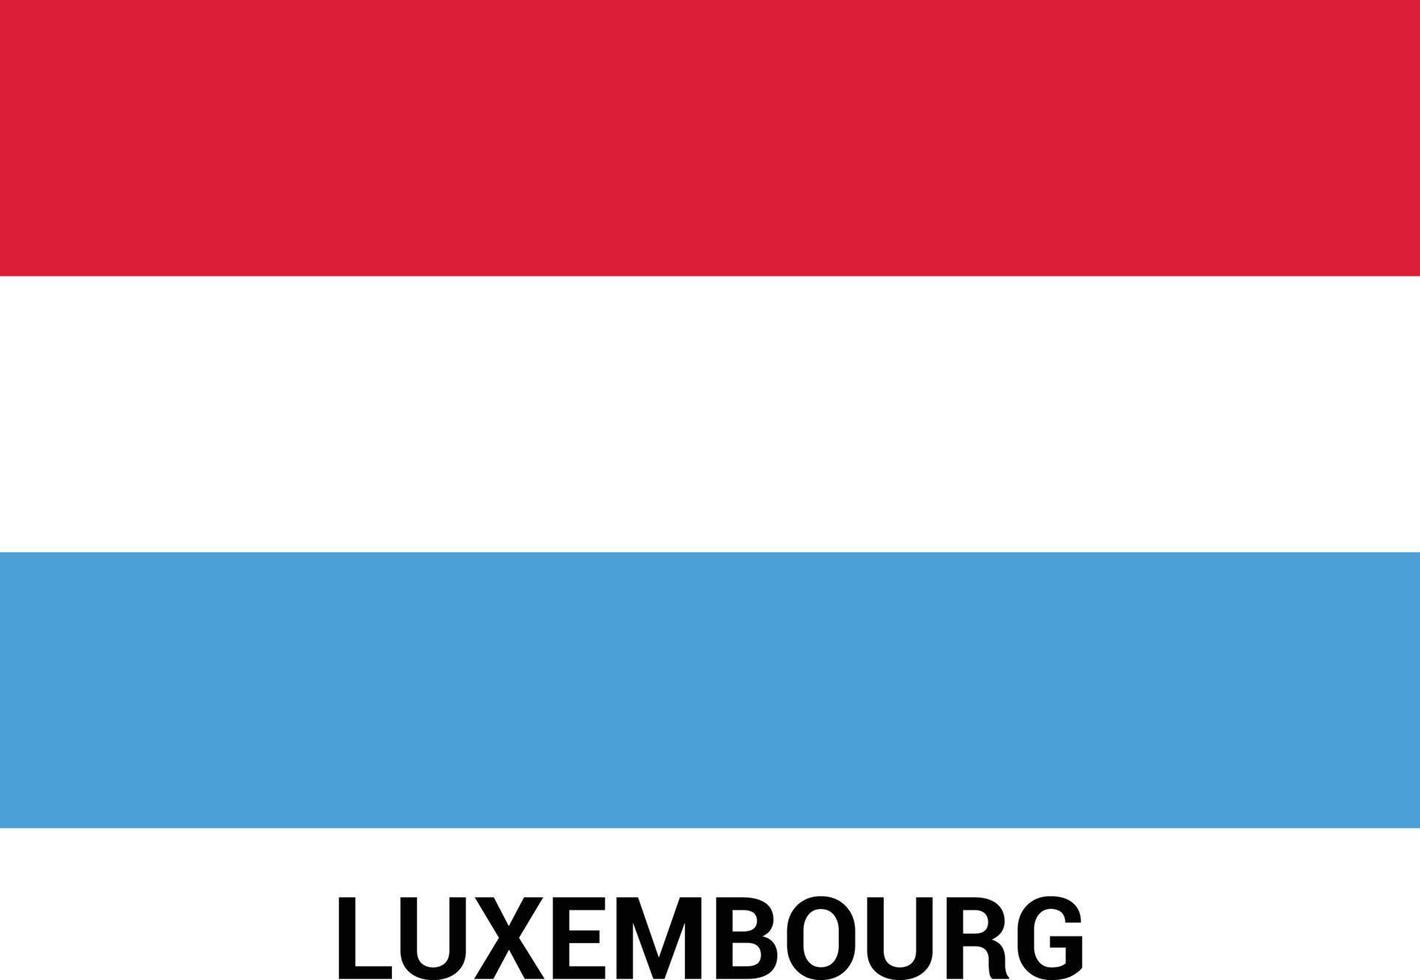 Luxembourg flag design vector